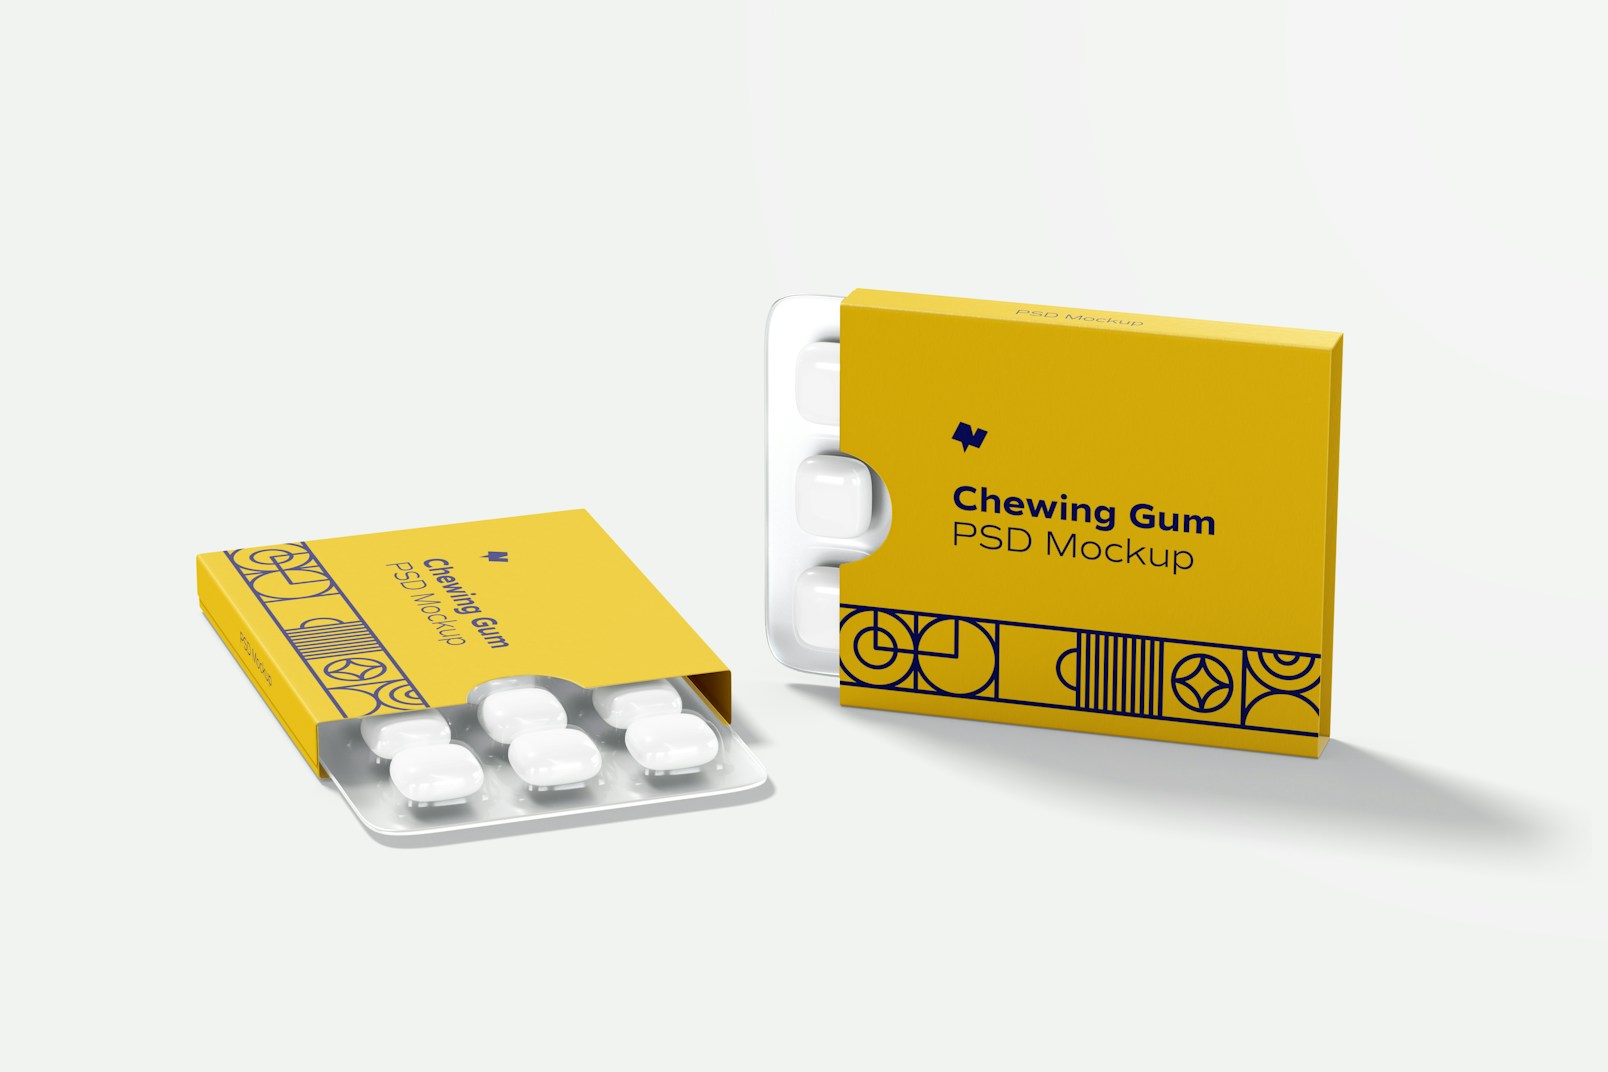 Chewing Gum Packaging Mockup, Front View